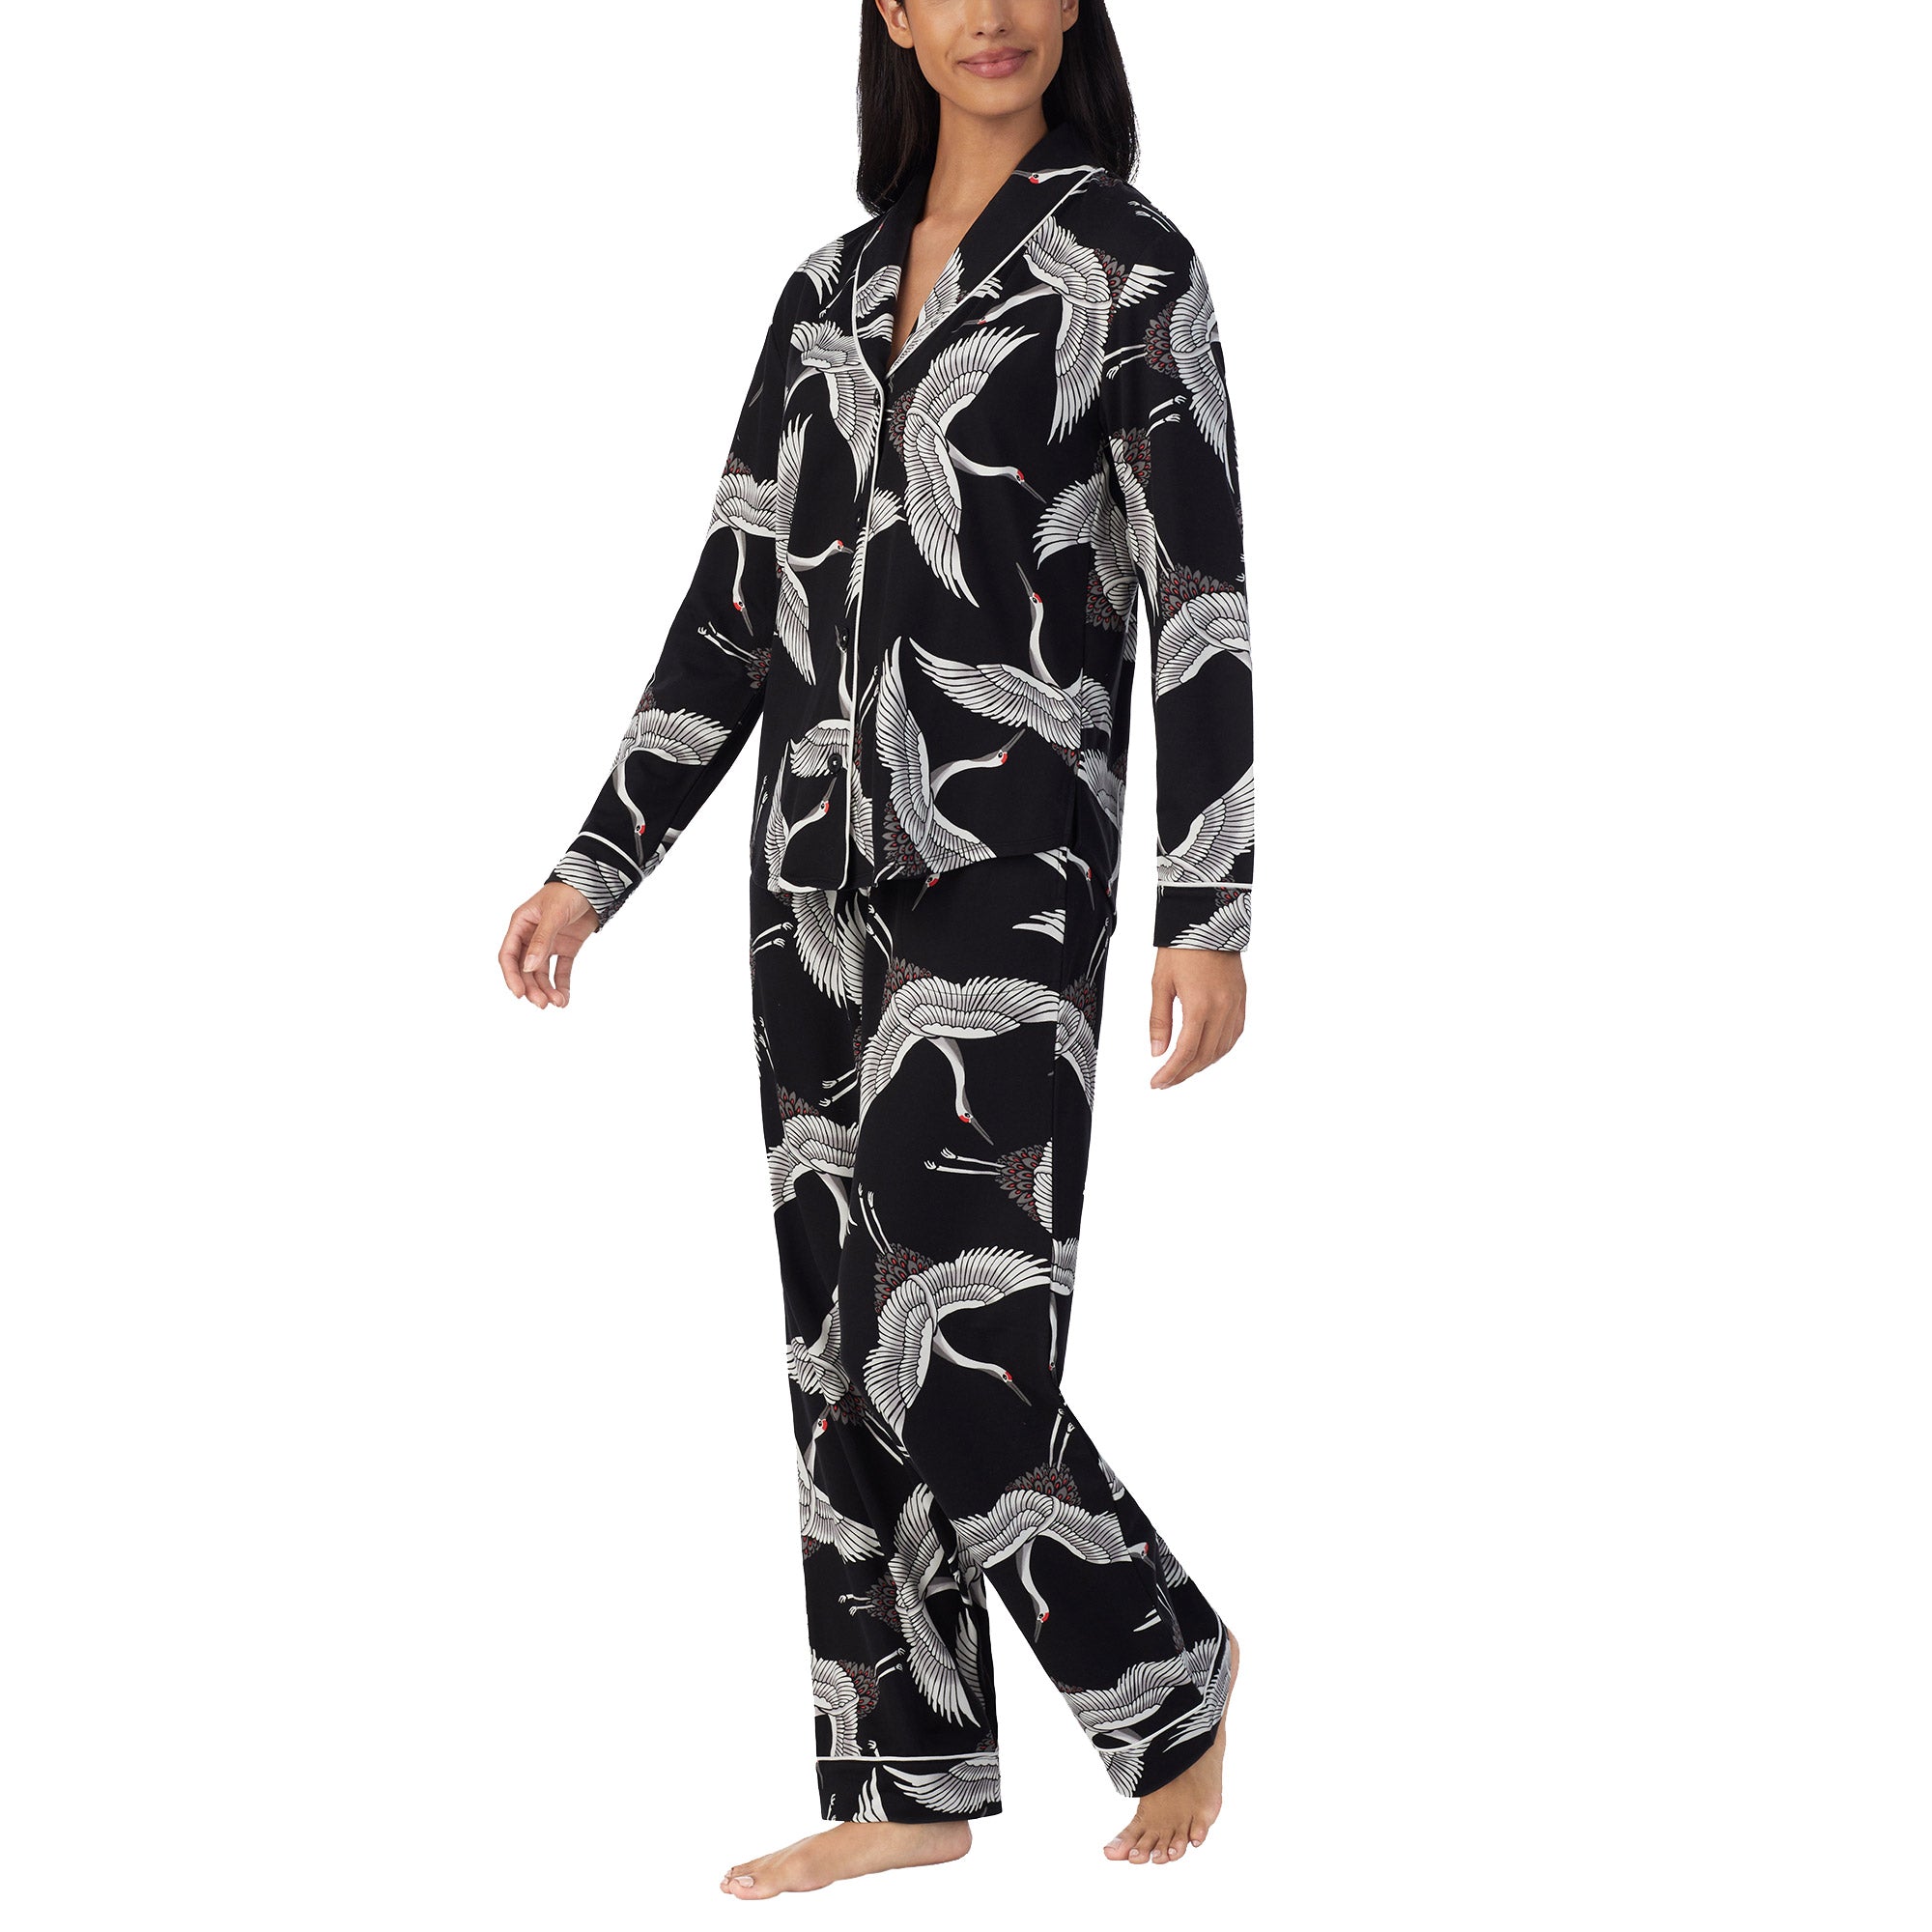 Shady Lady Eyewear - Working from home and don't wanna get out of your PJs?  Well keep it cute in our shawl collar PJ set available now @nordstrom!